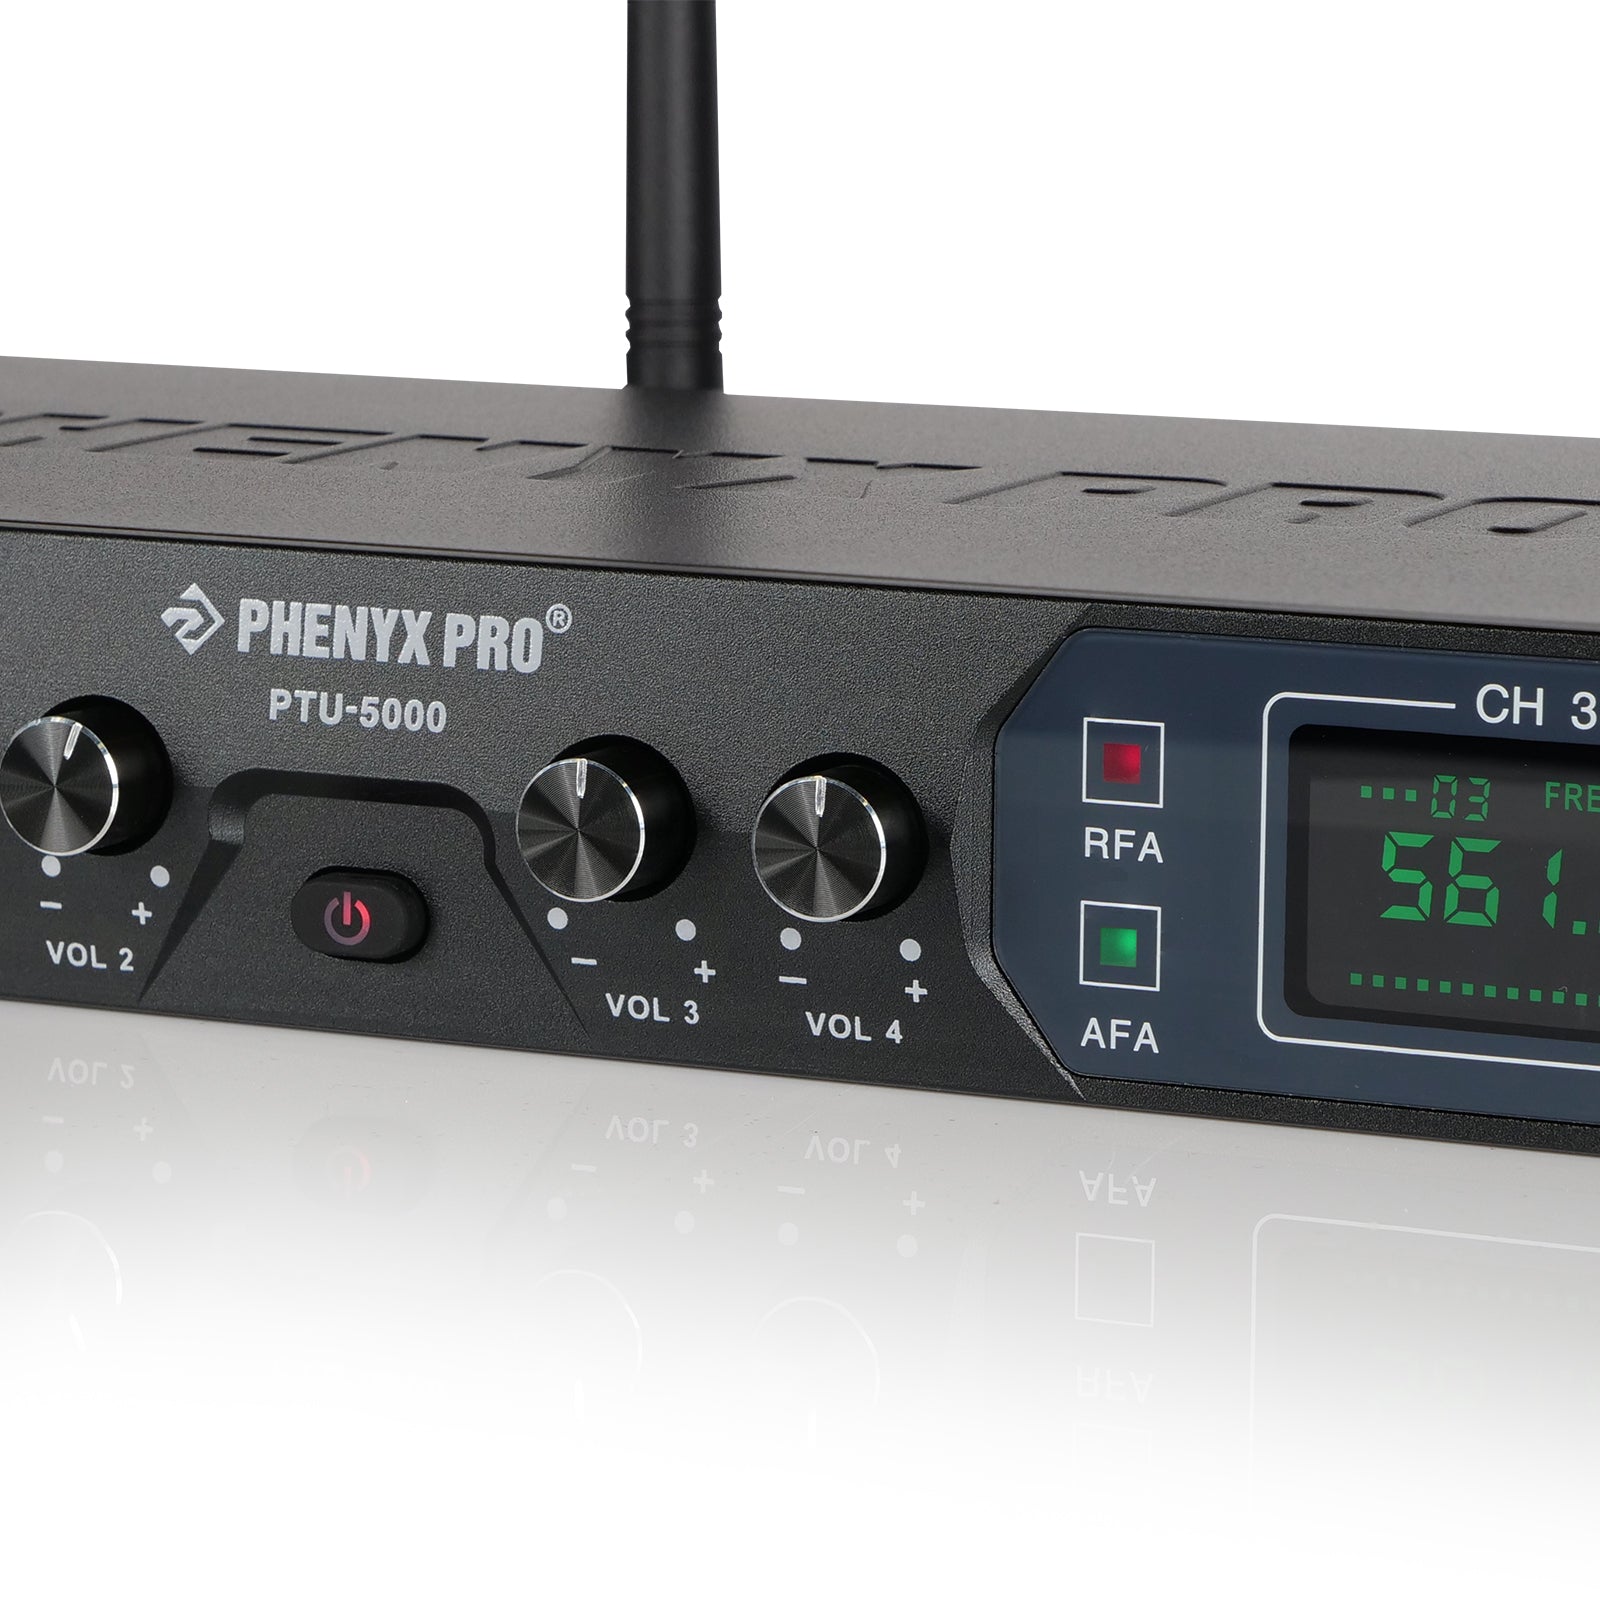 Phenyx Pro PTU-5000A Quad-Channel UHF Wireless Microphone System, individual volume control for precise vocal balancing